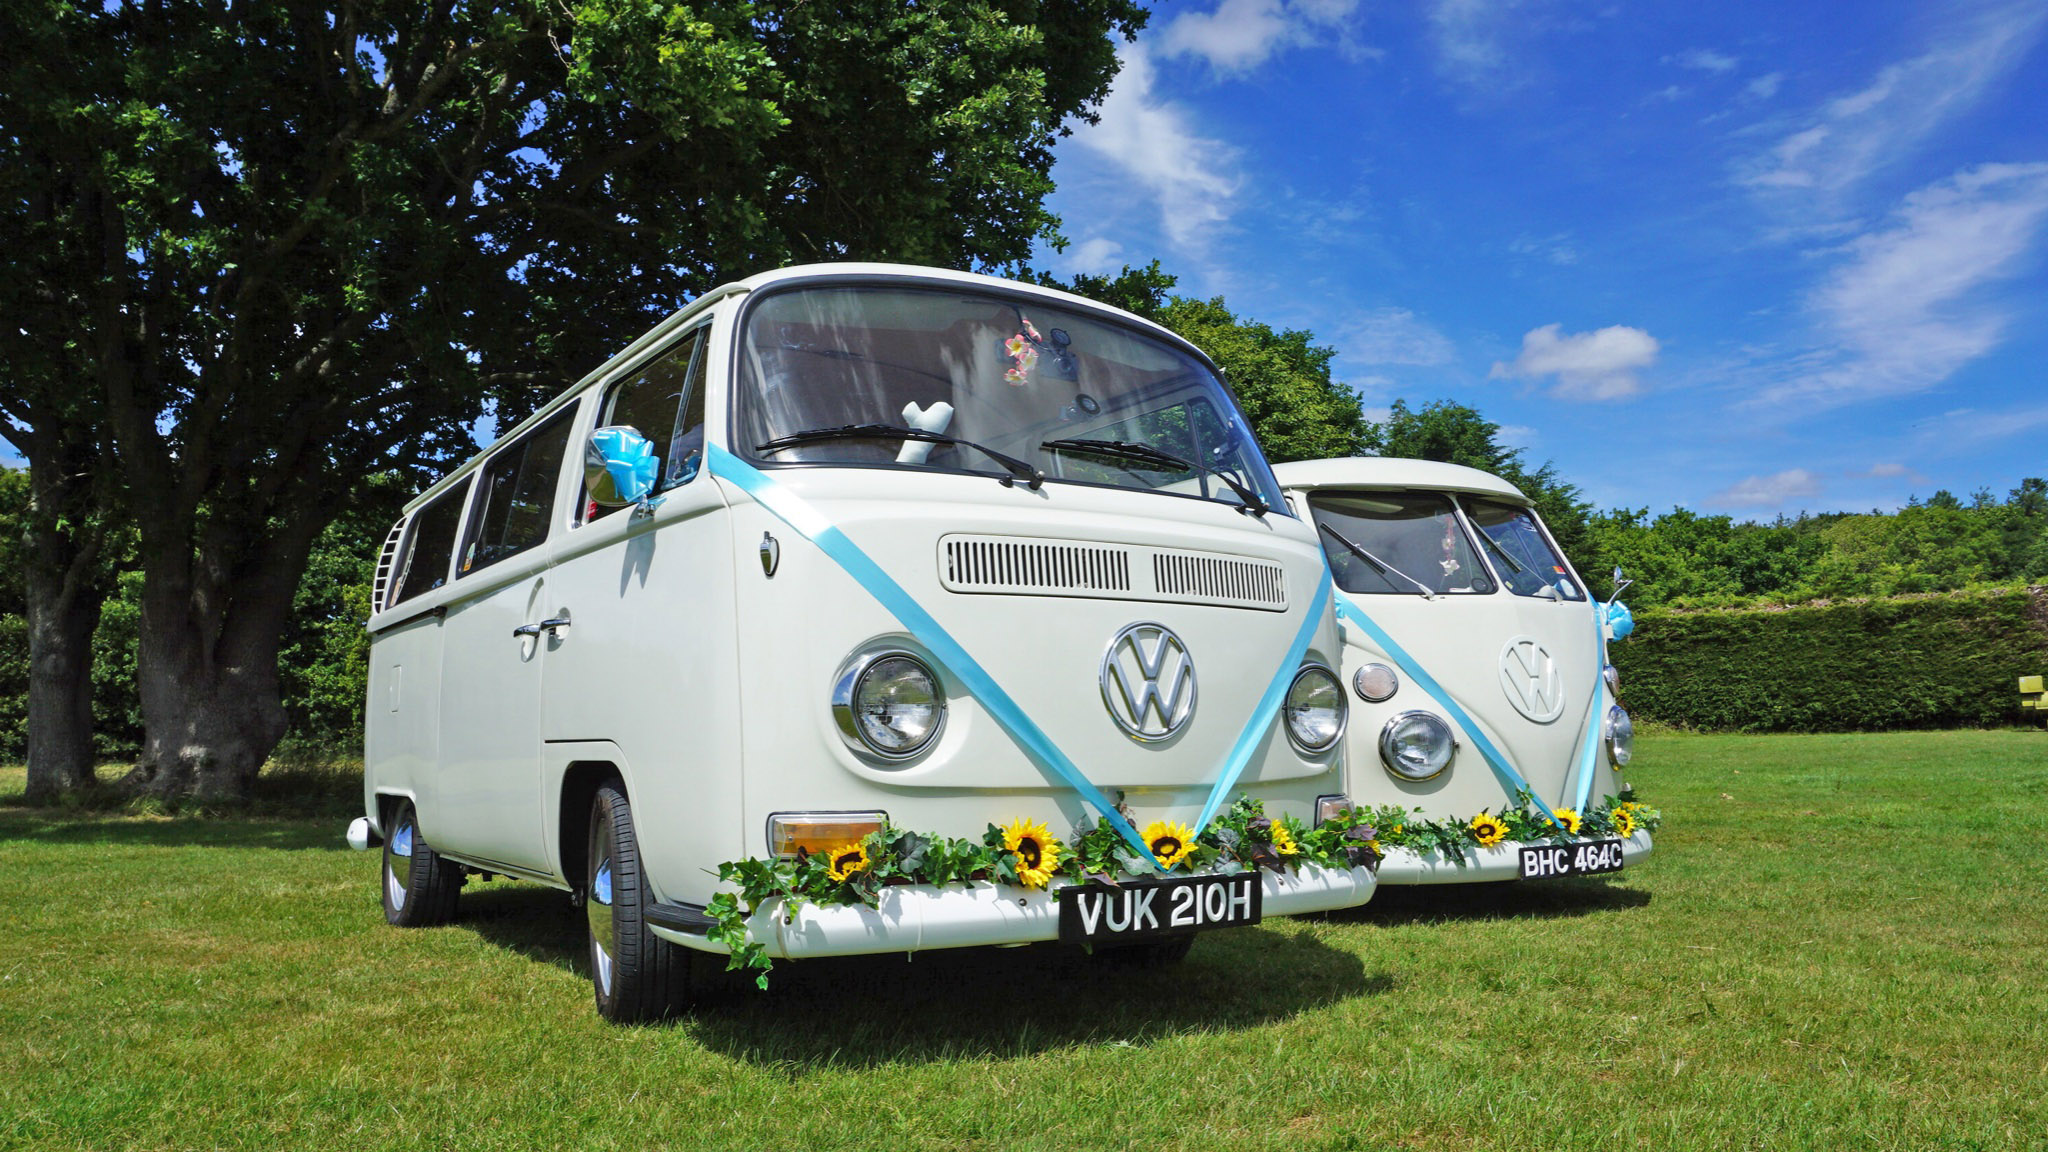 Two Classic VW Campervans decorated with turquoise blue Ribbons at a local Guildford park with green trees in the background